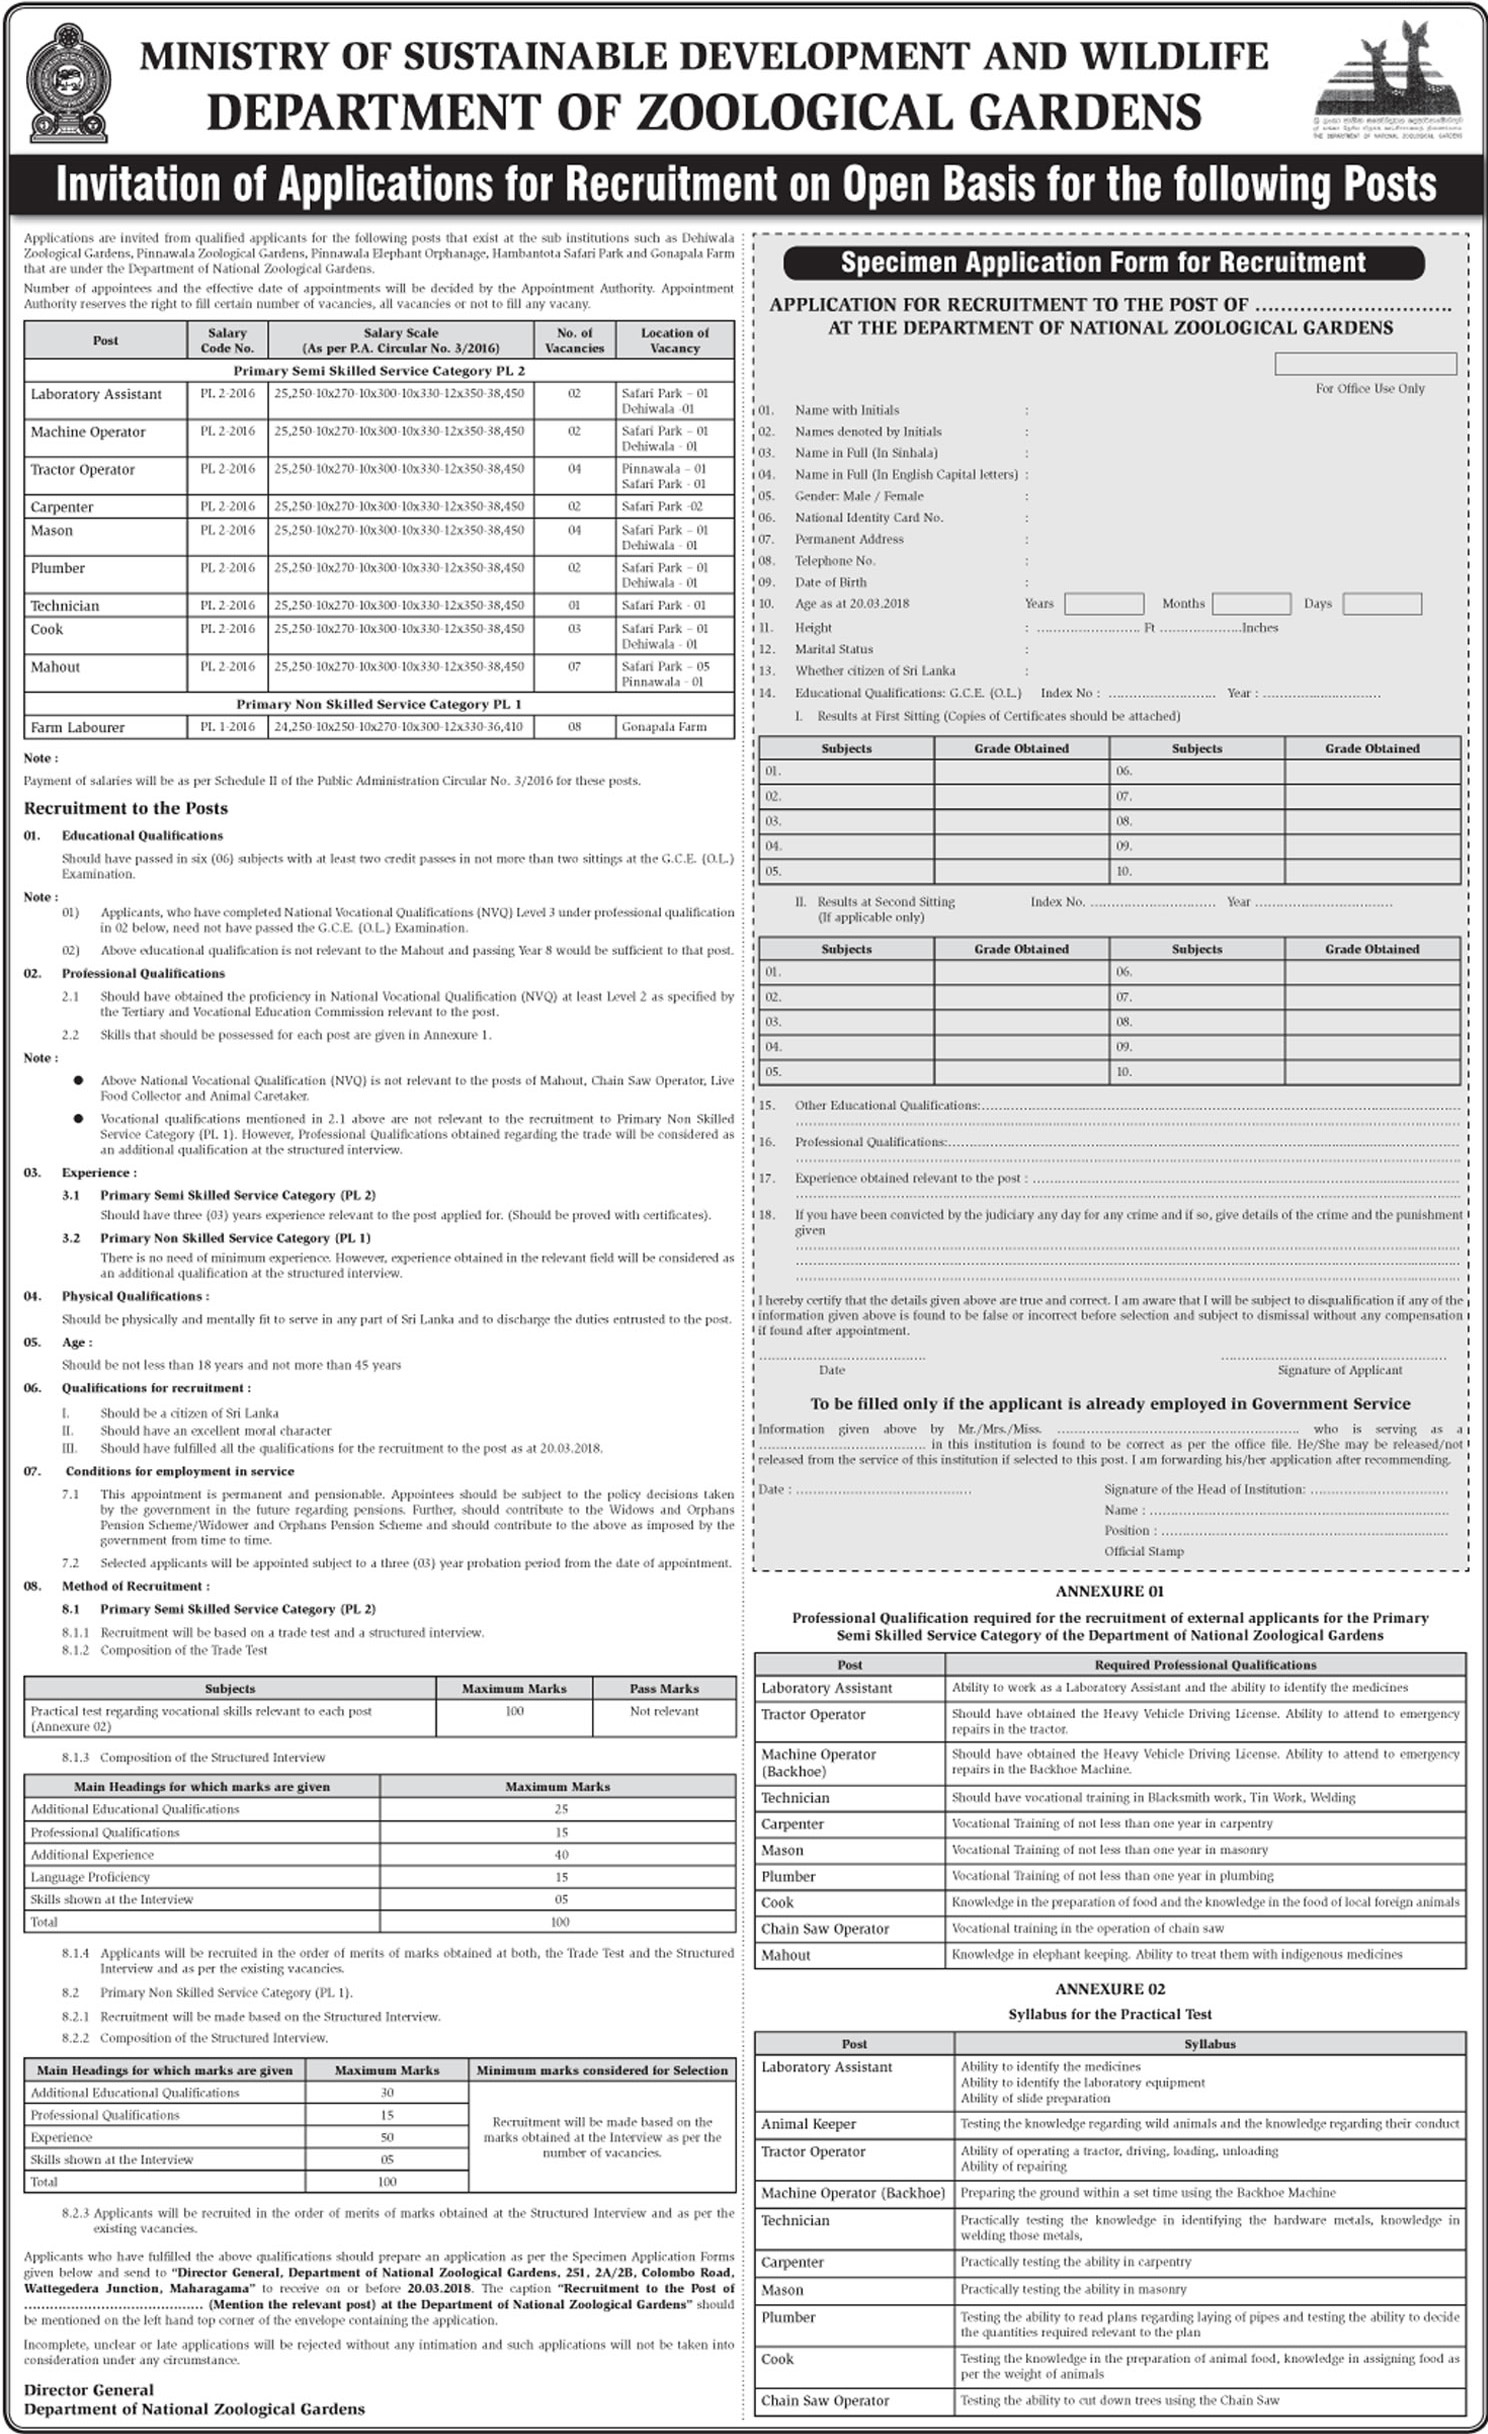 Laboratory Assistant, Machine Operator, Tractor Operator, Carpenter, Mason, Plumber, Technician, Cook, Mahout, Farm Labourer – Department of National Zoological Gardens